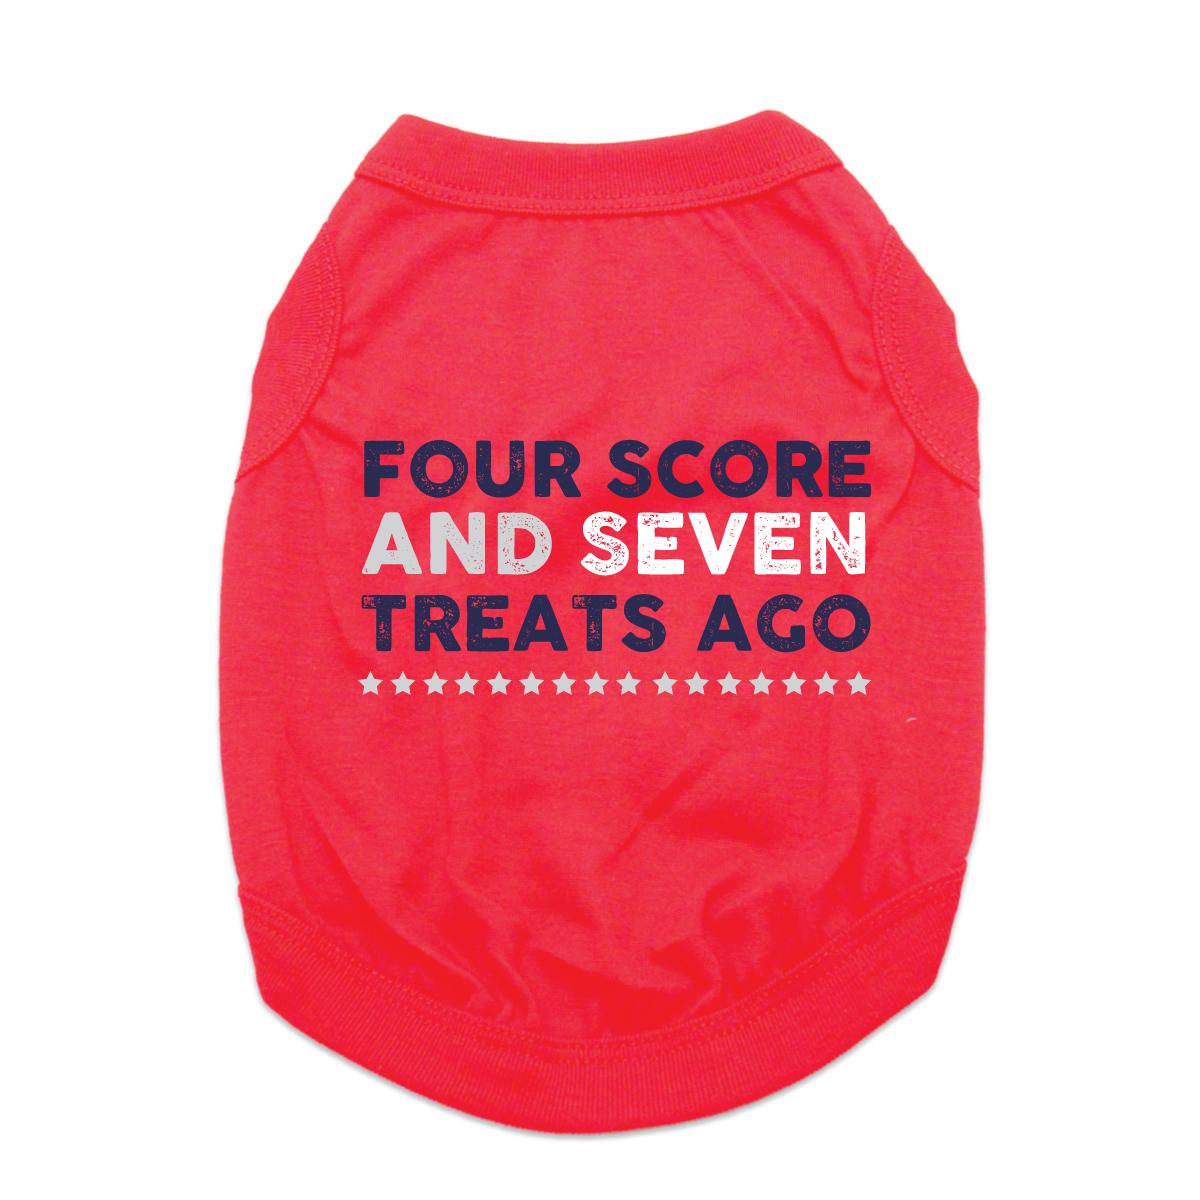 Four Score and Seven Treats Ago Dog Shirt - Red